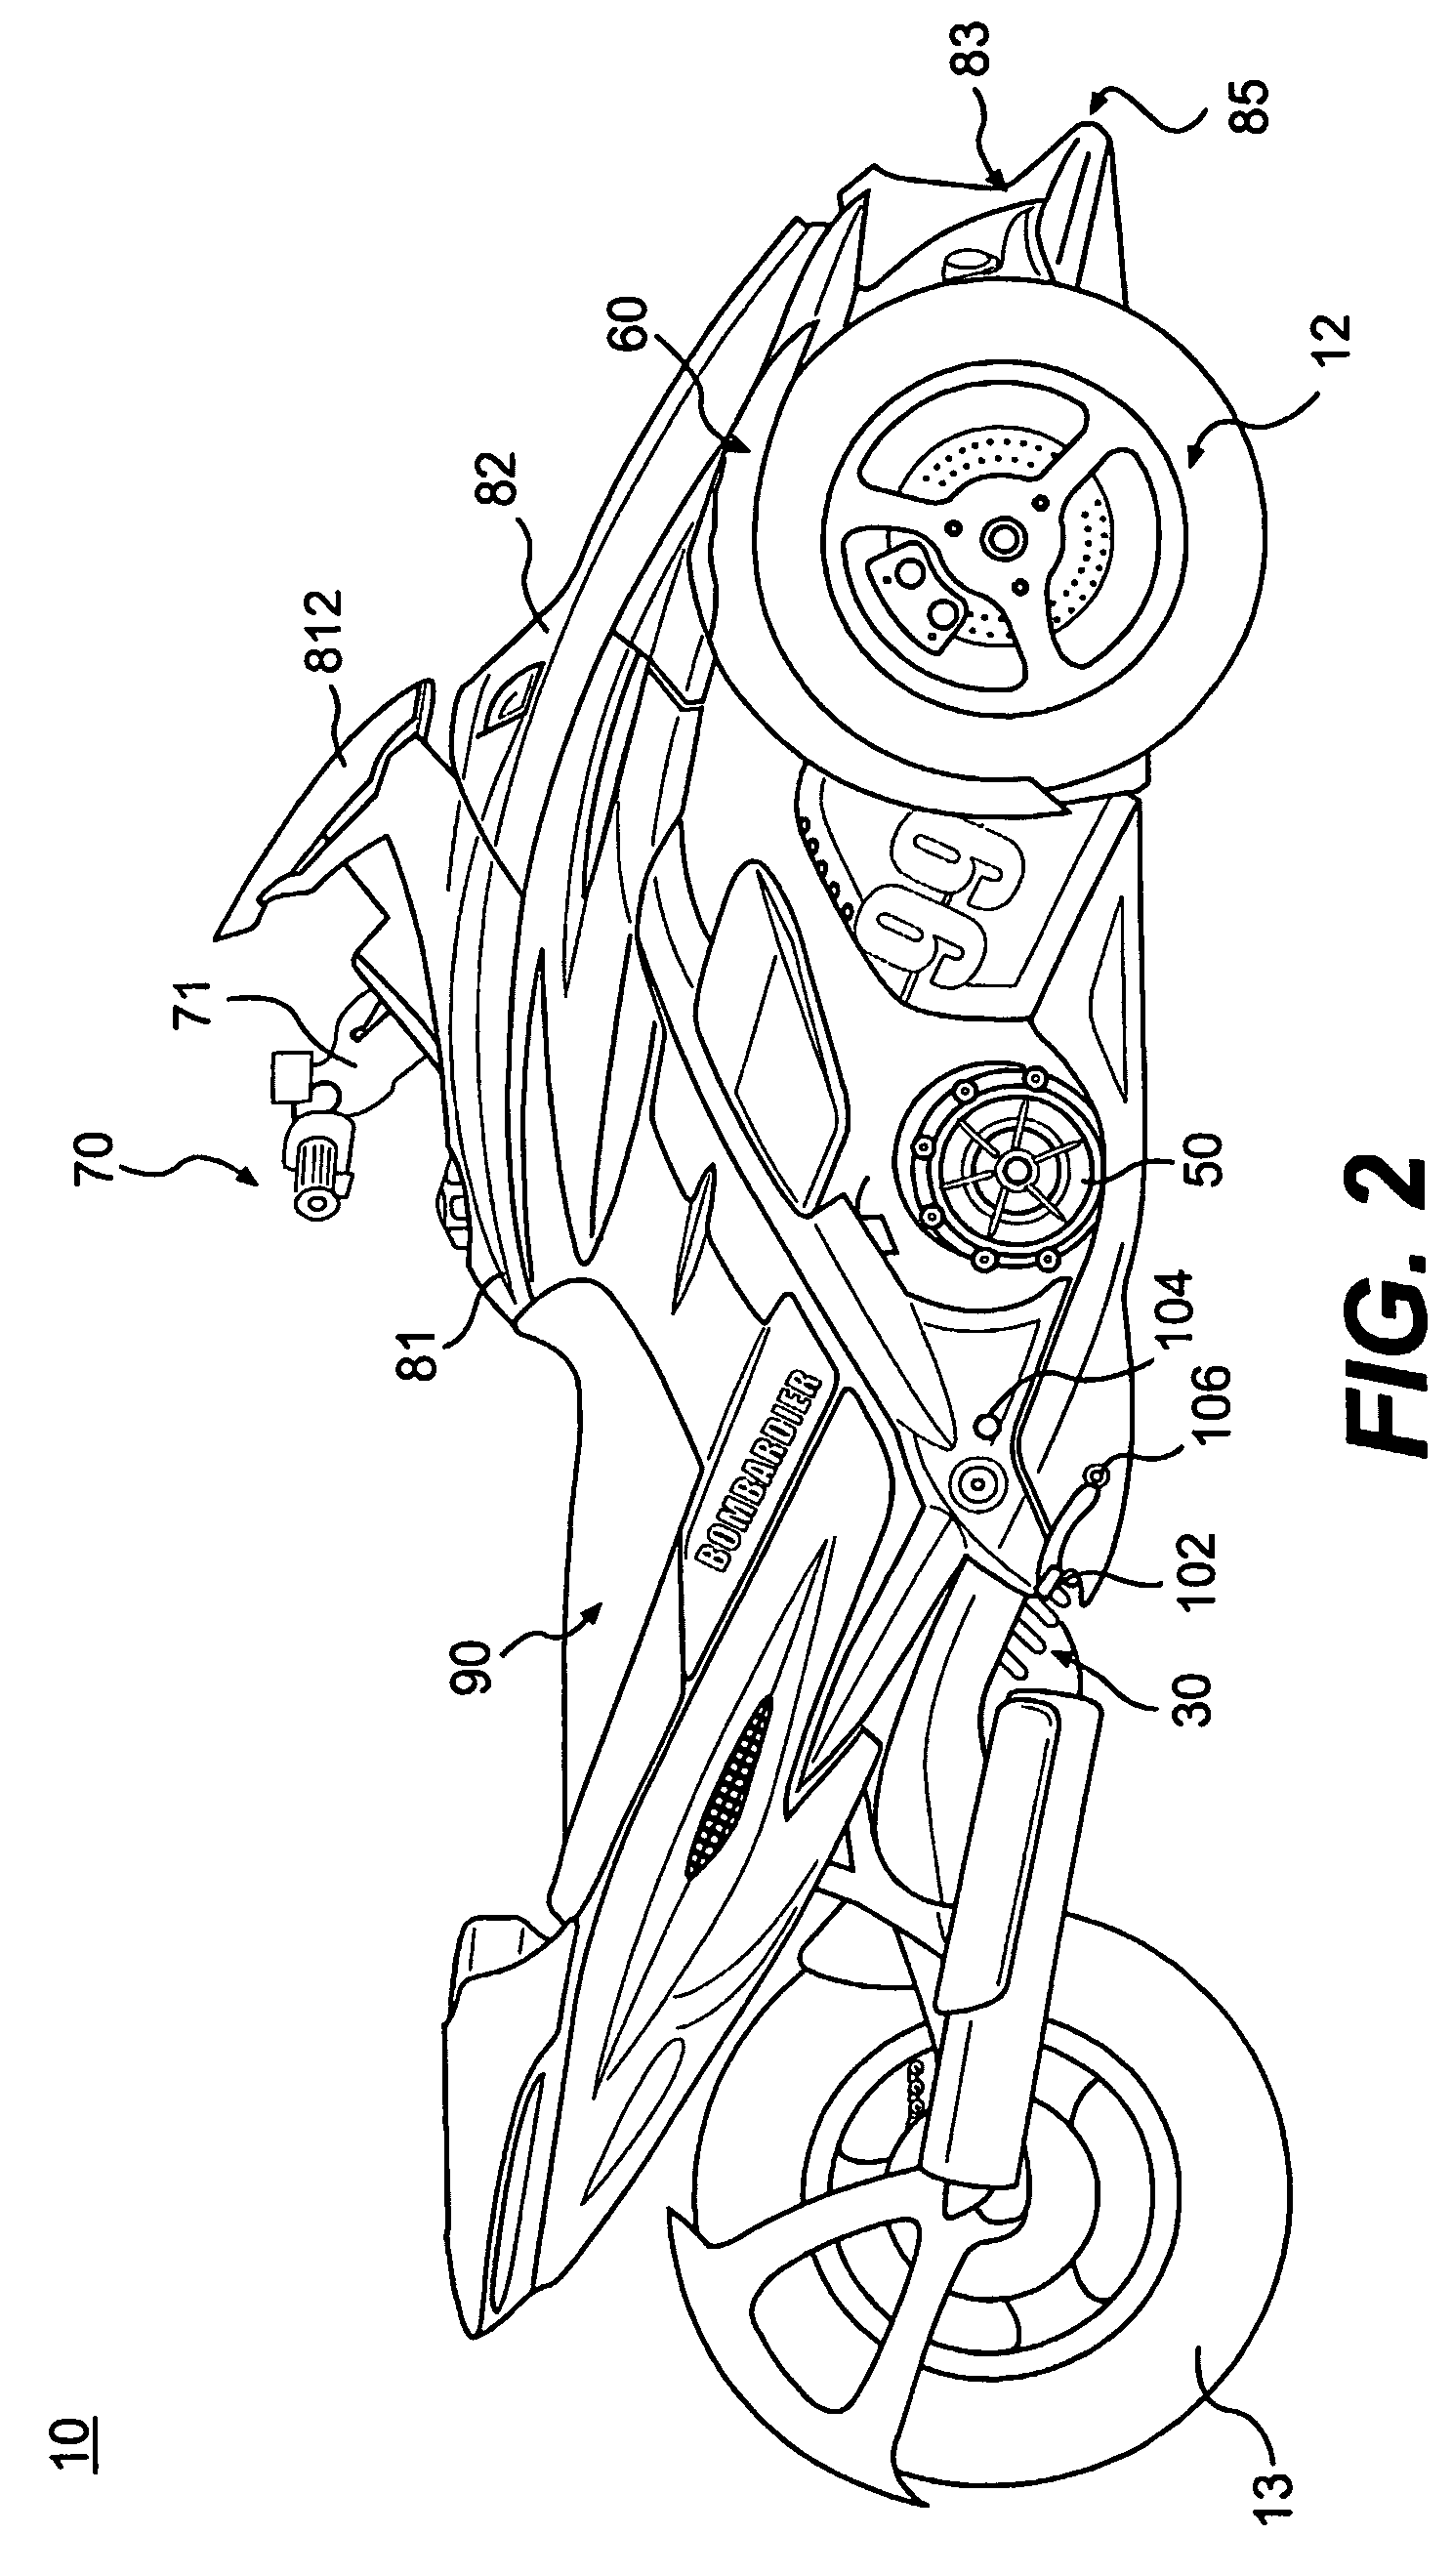 Three-wheeled vehicle having a split radiator and an interior storage compartment